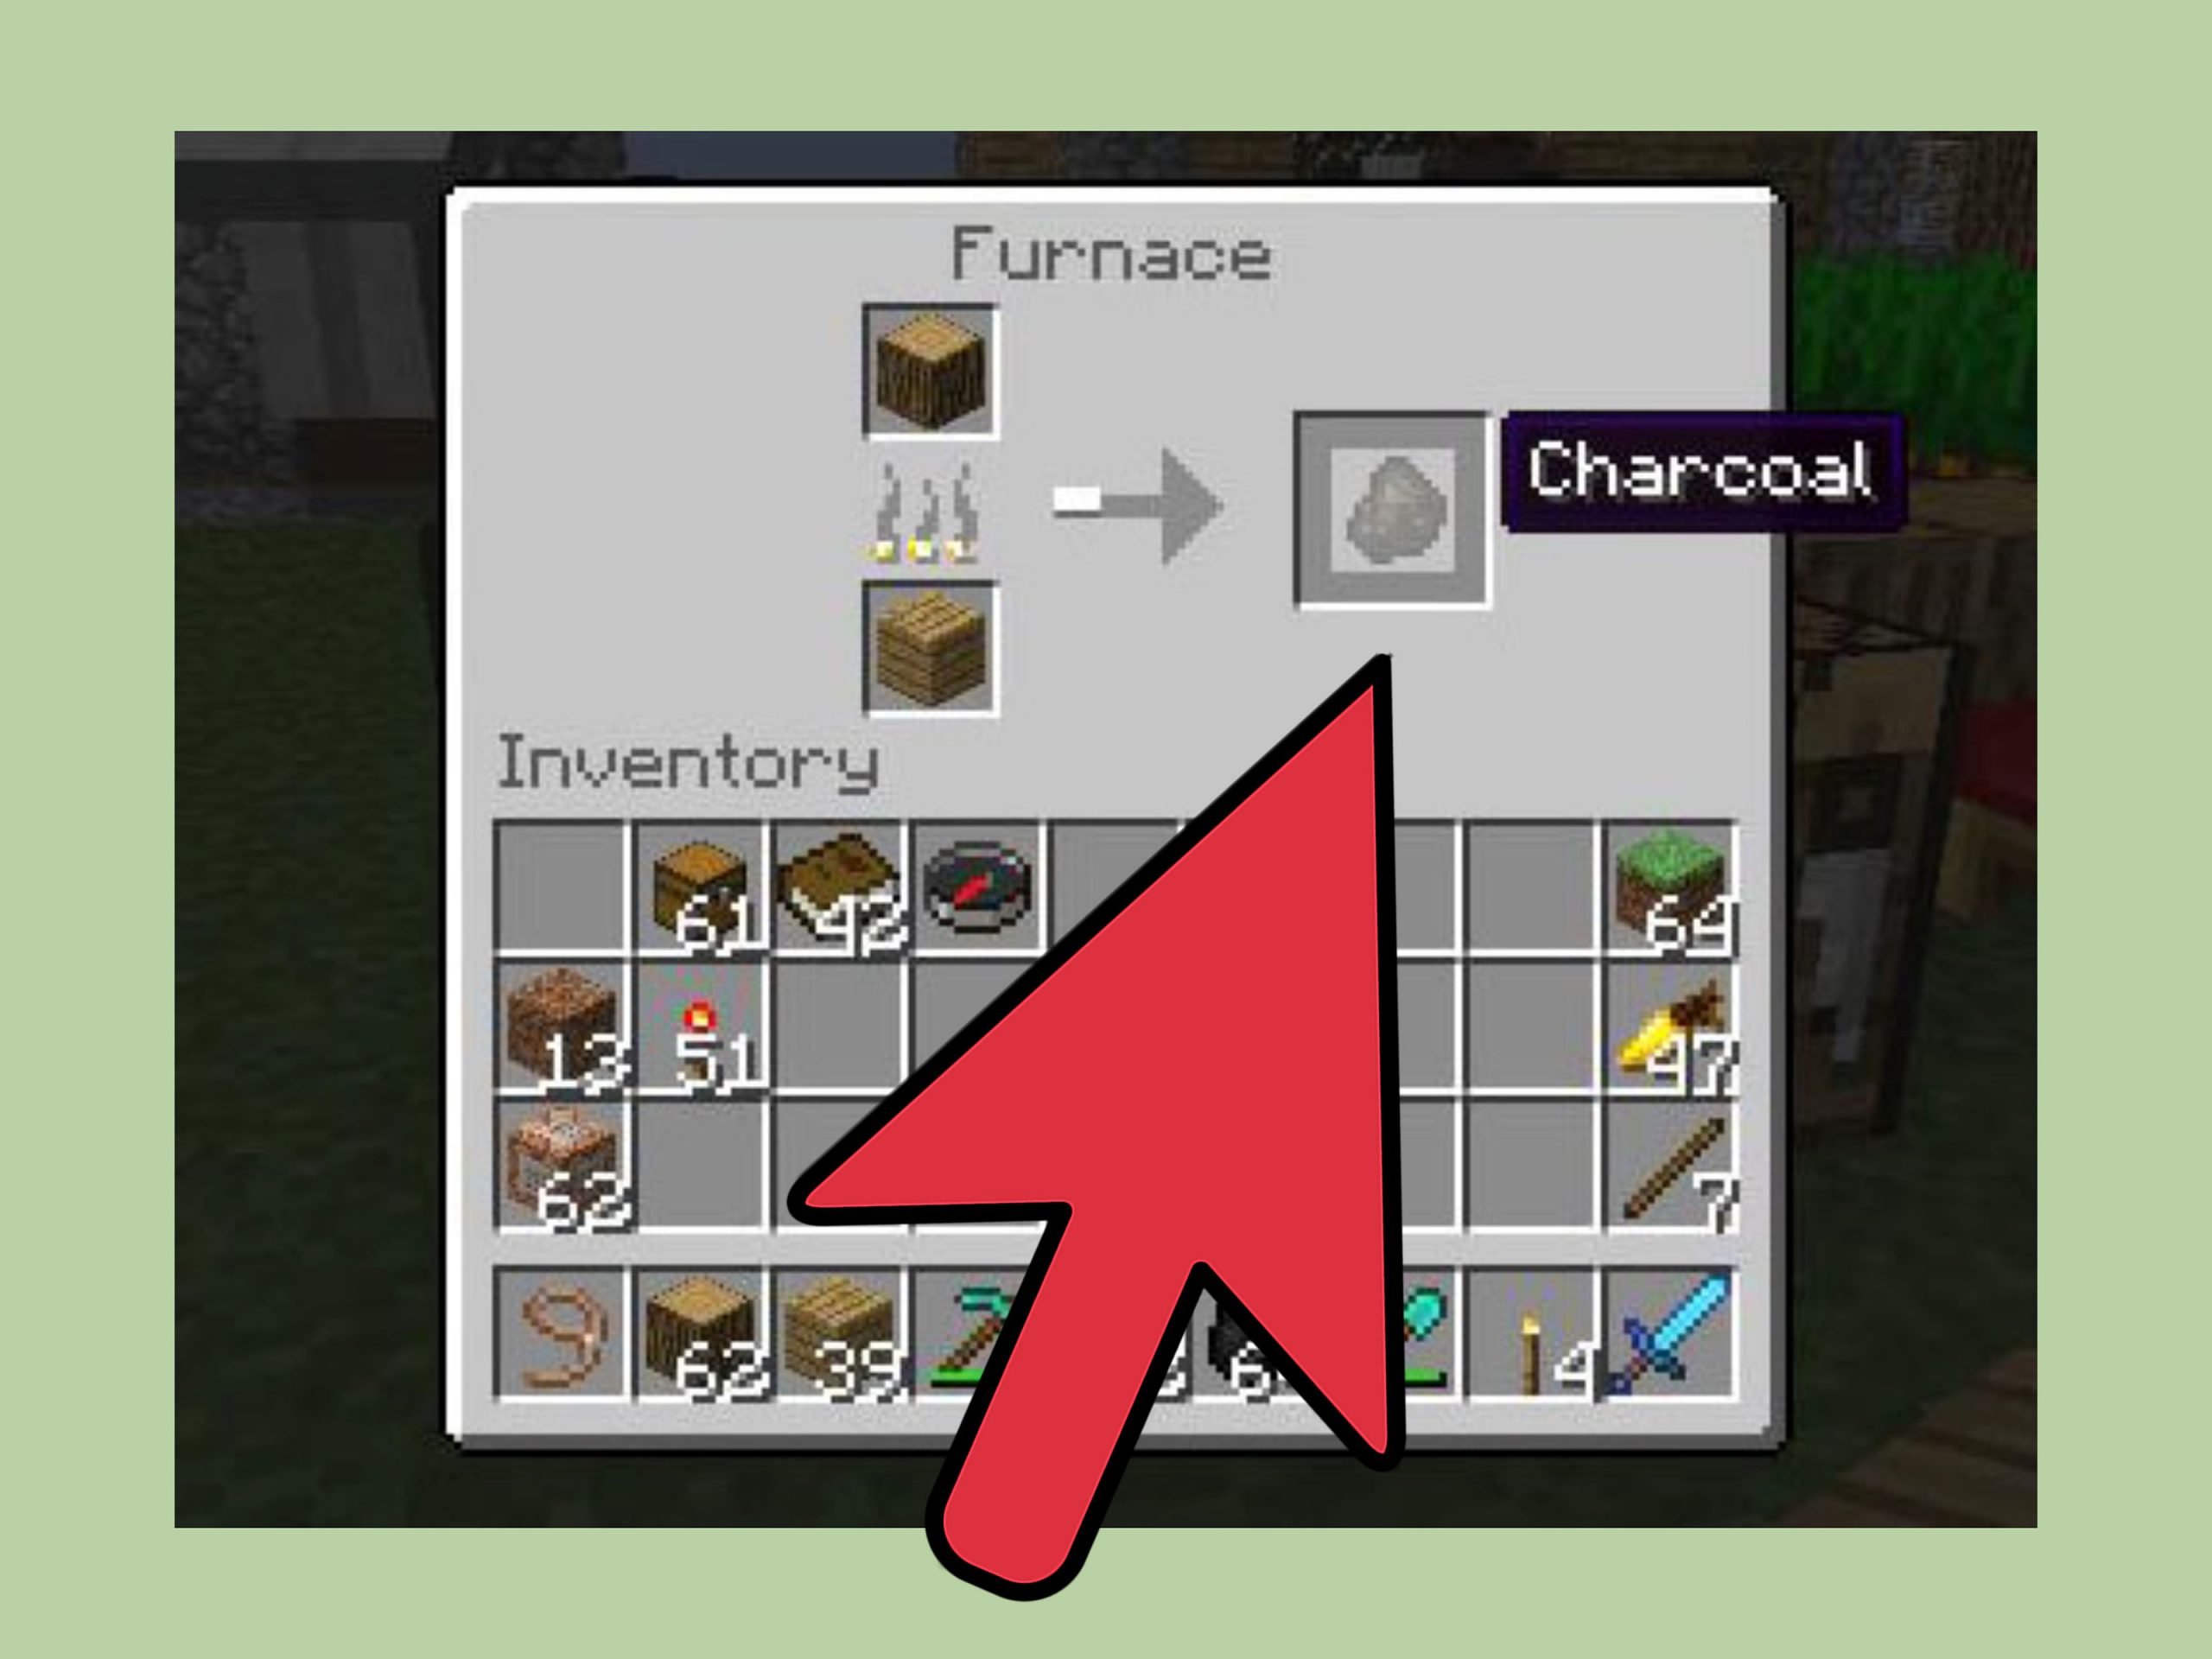 3 Easy Ways to Make a Furnace in Minecraft (with Pictures)